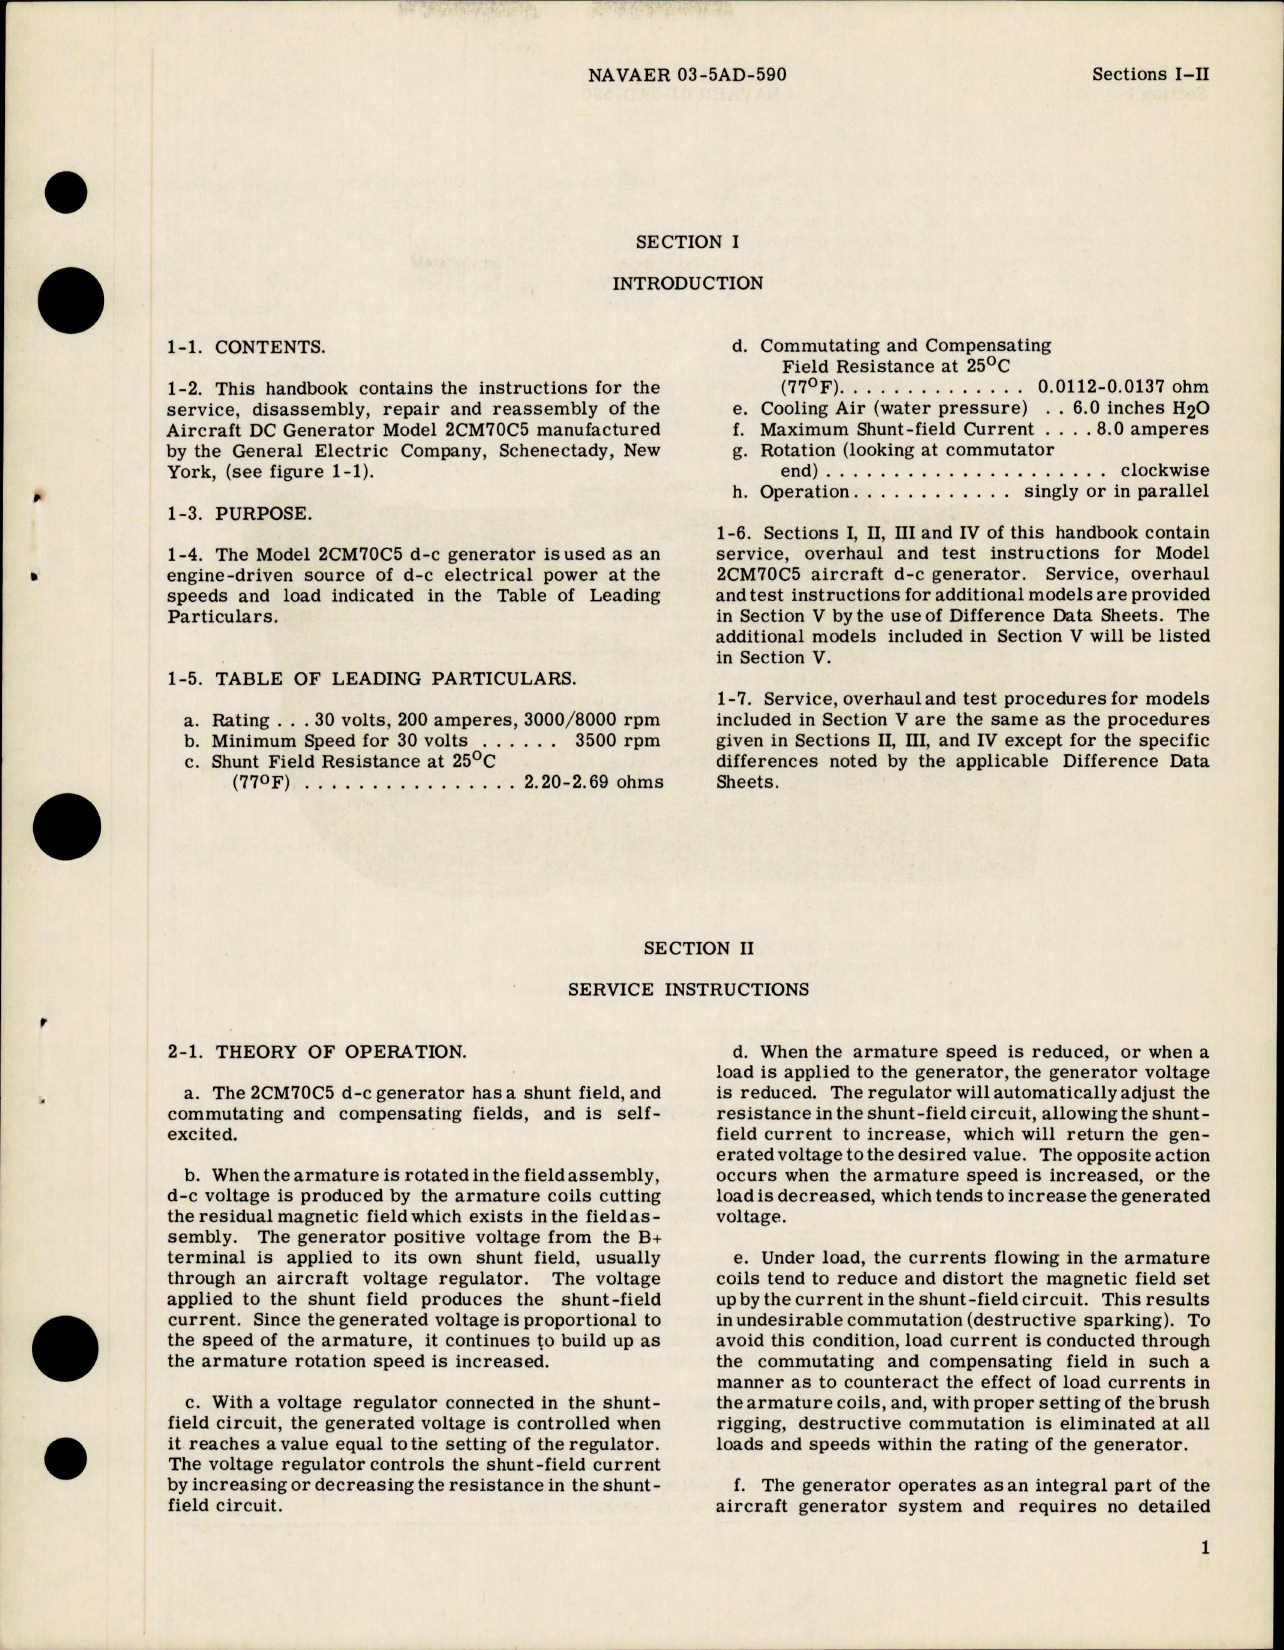 Sample page 5 from AirCorps Library document: Overhaul and Service Instructions for DC Generator - Models 2CM70C5 and 2CM70D2